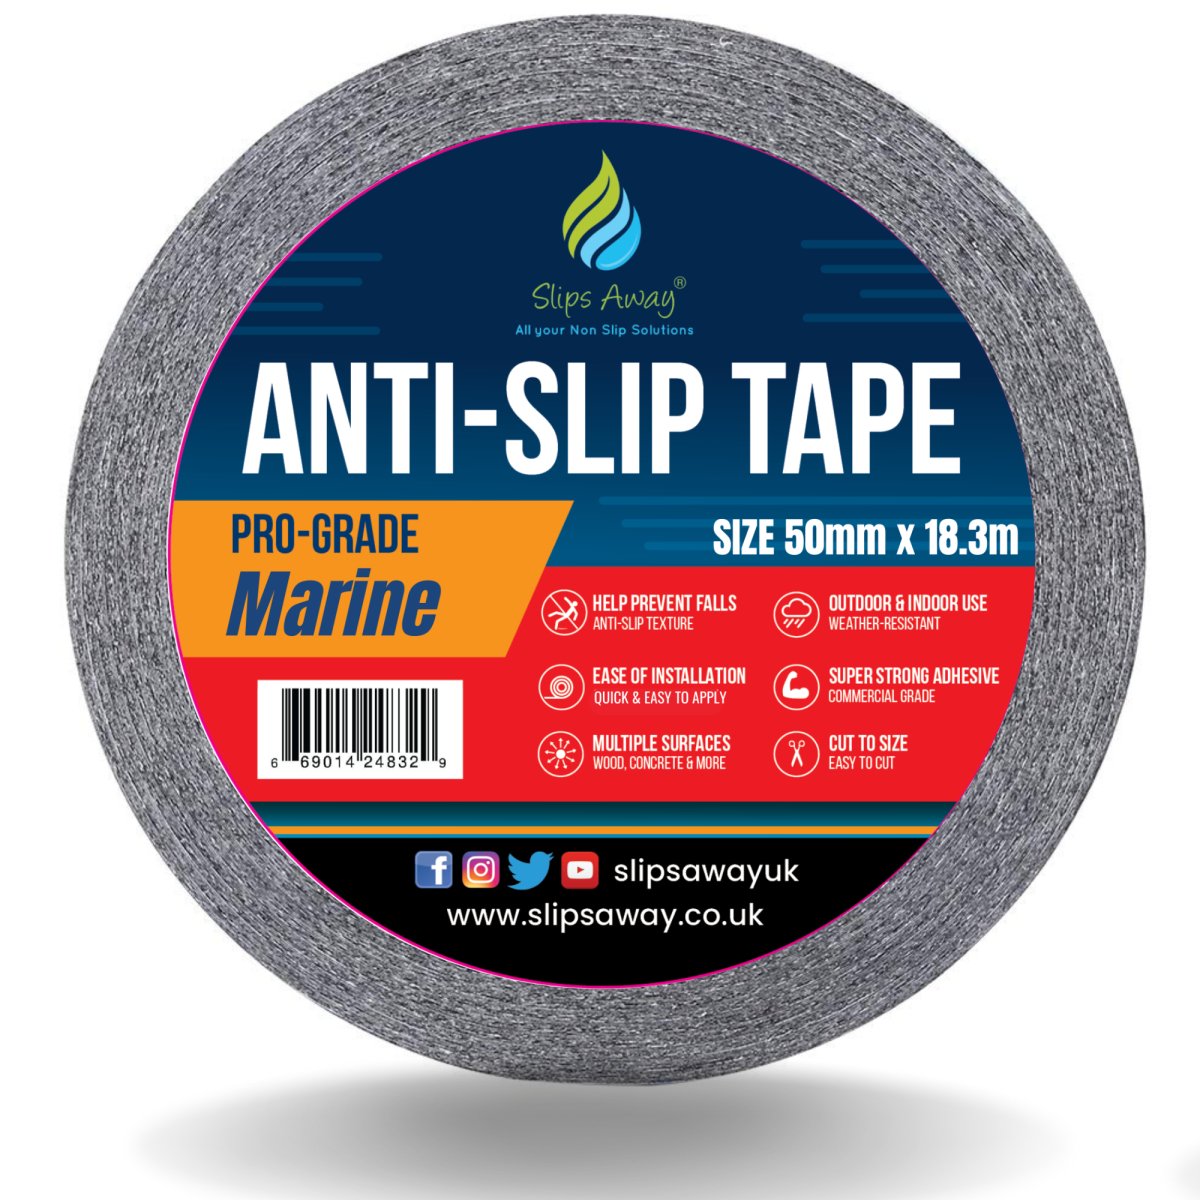 Anti Slip Waterproof Resistant Marine Safety-Grip Non Skid Tape perfect for Boats - Slips Away - Anti slip tape - Marine-Safety-Grip-Black-50mm-1 -